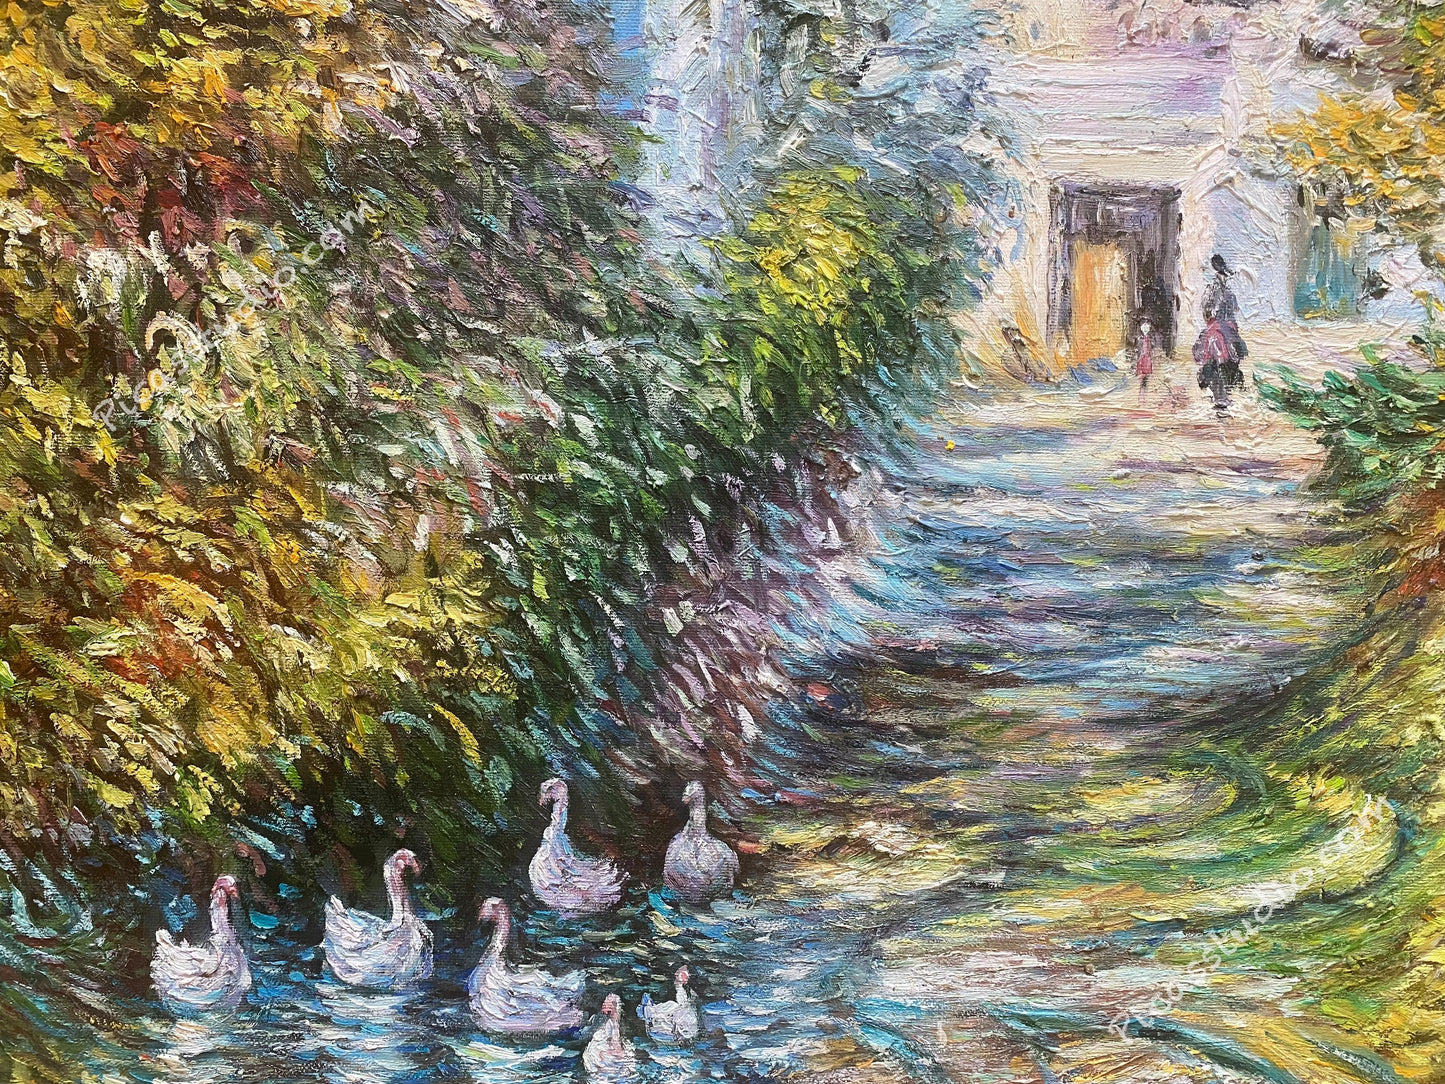 Claude Monet Oil Painting The Duck Pond Landscape Hand Painted Art on Canvas Wall Decor Unframed